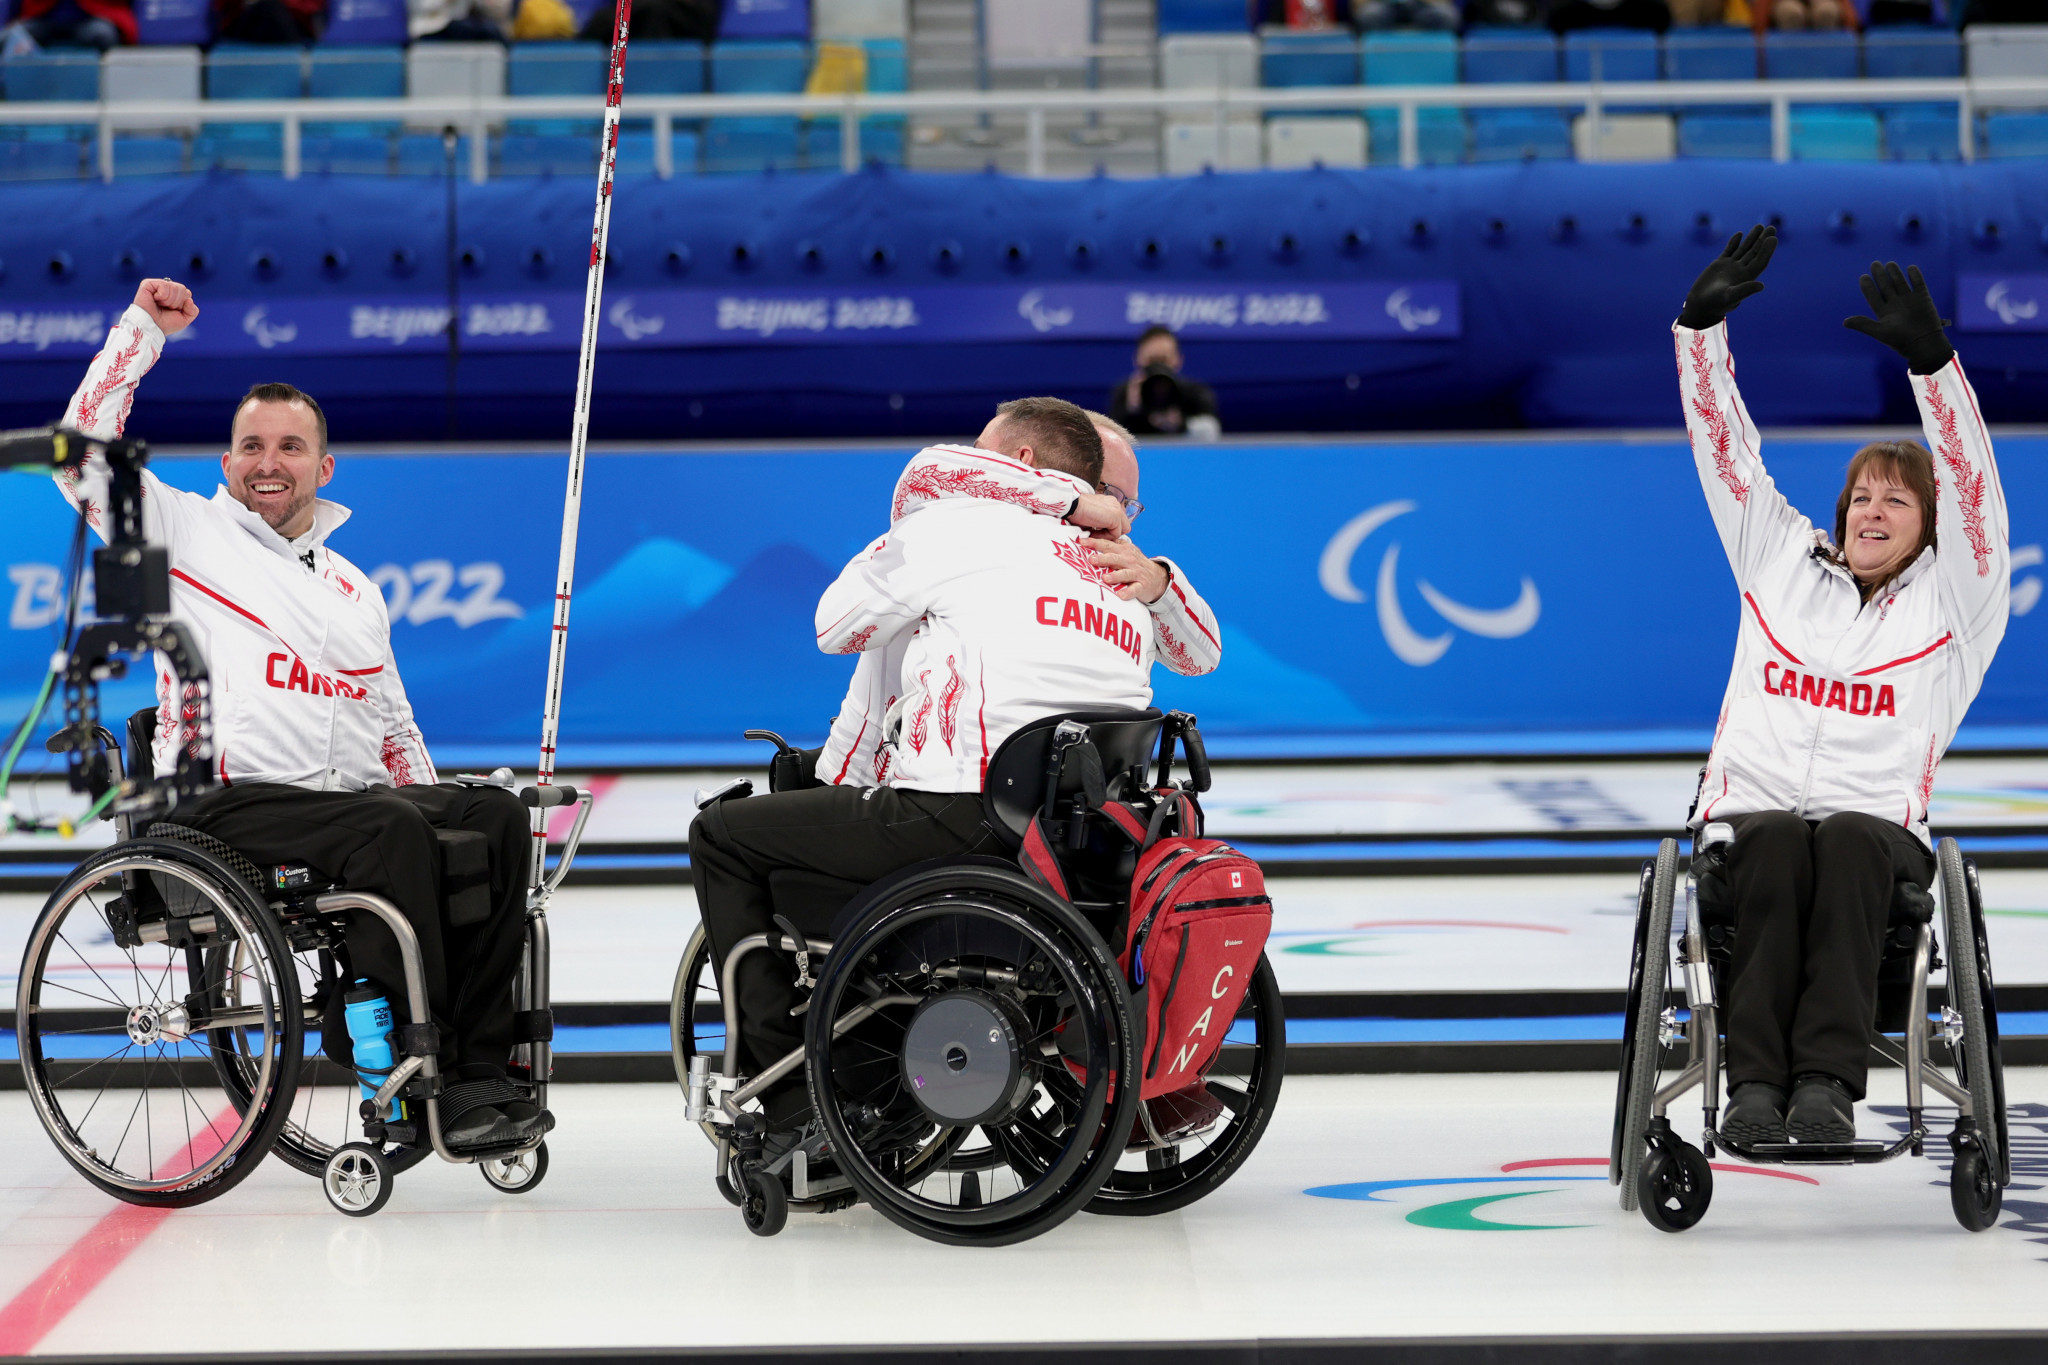 Canada won bronze in the wheelchair curling, following up their bronze at Pyeongchang 2018 ©Getty Images